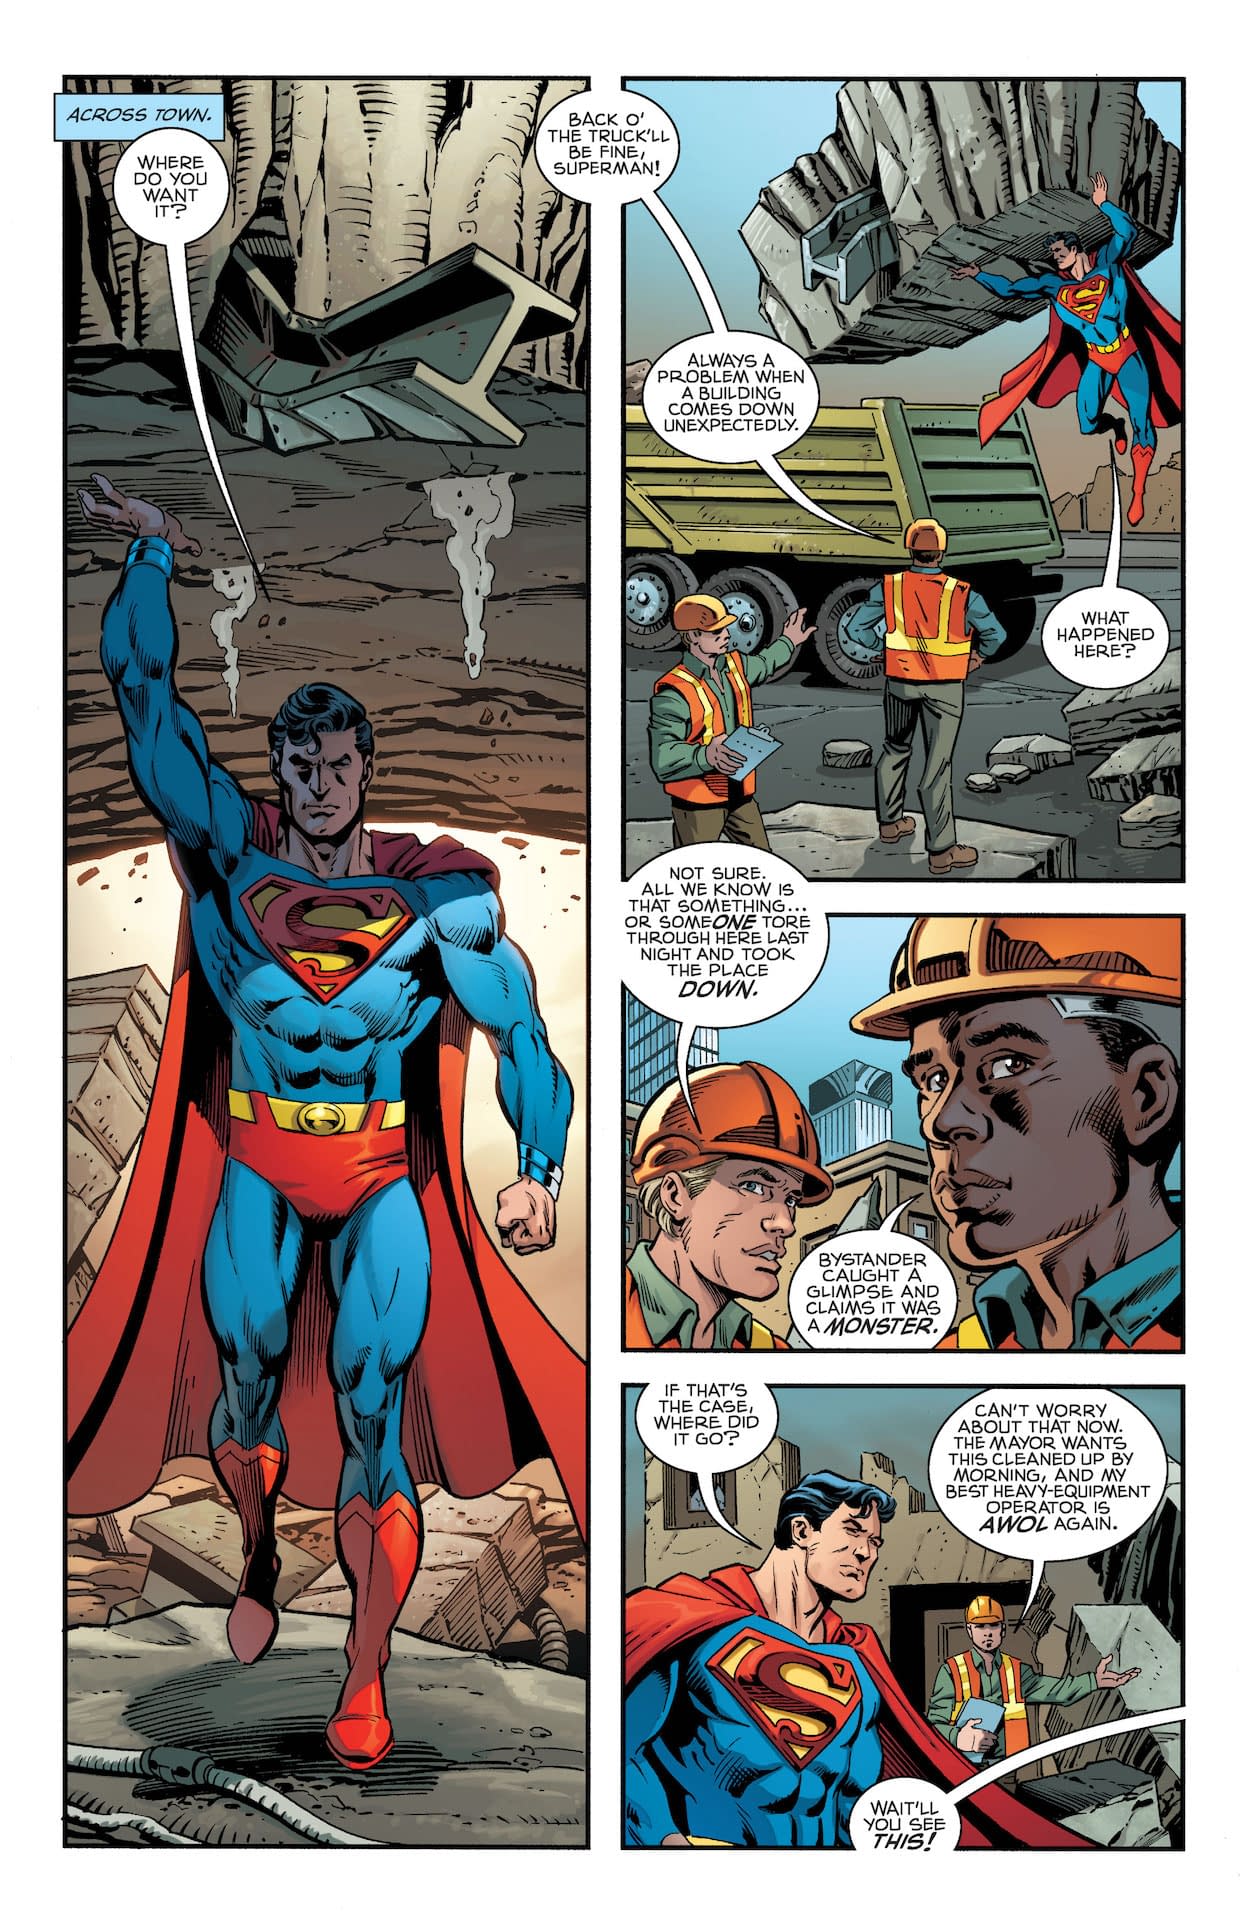 Death of Superman 30th Anniversary Special #1 Preview: For Nostalgia